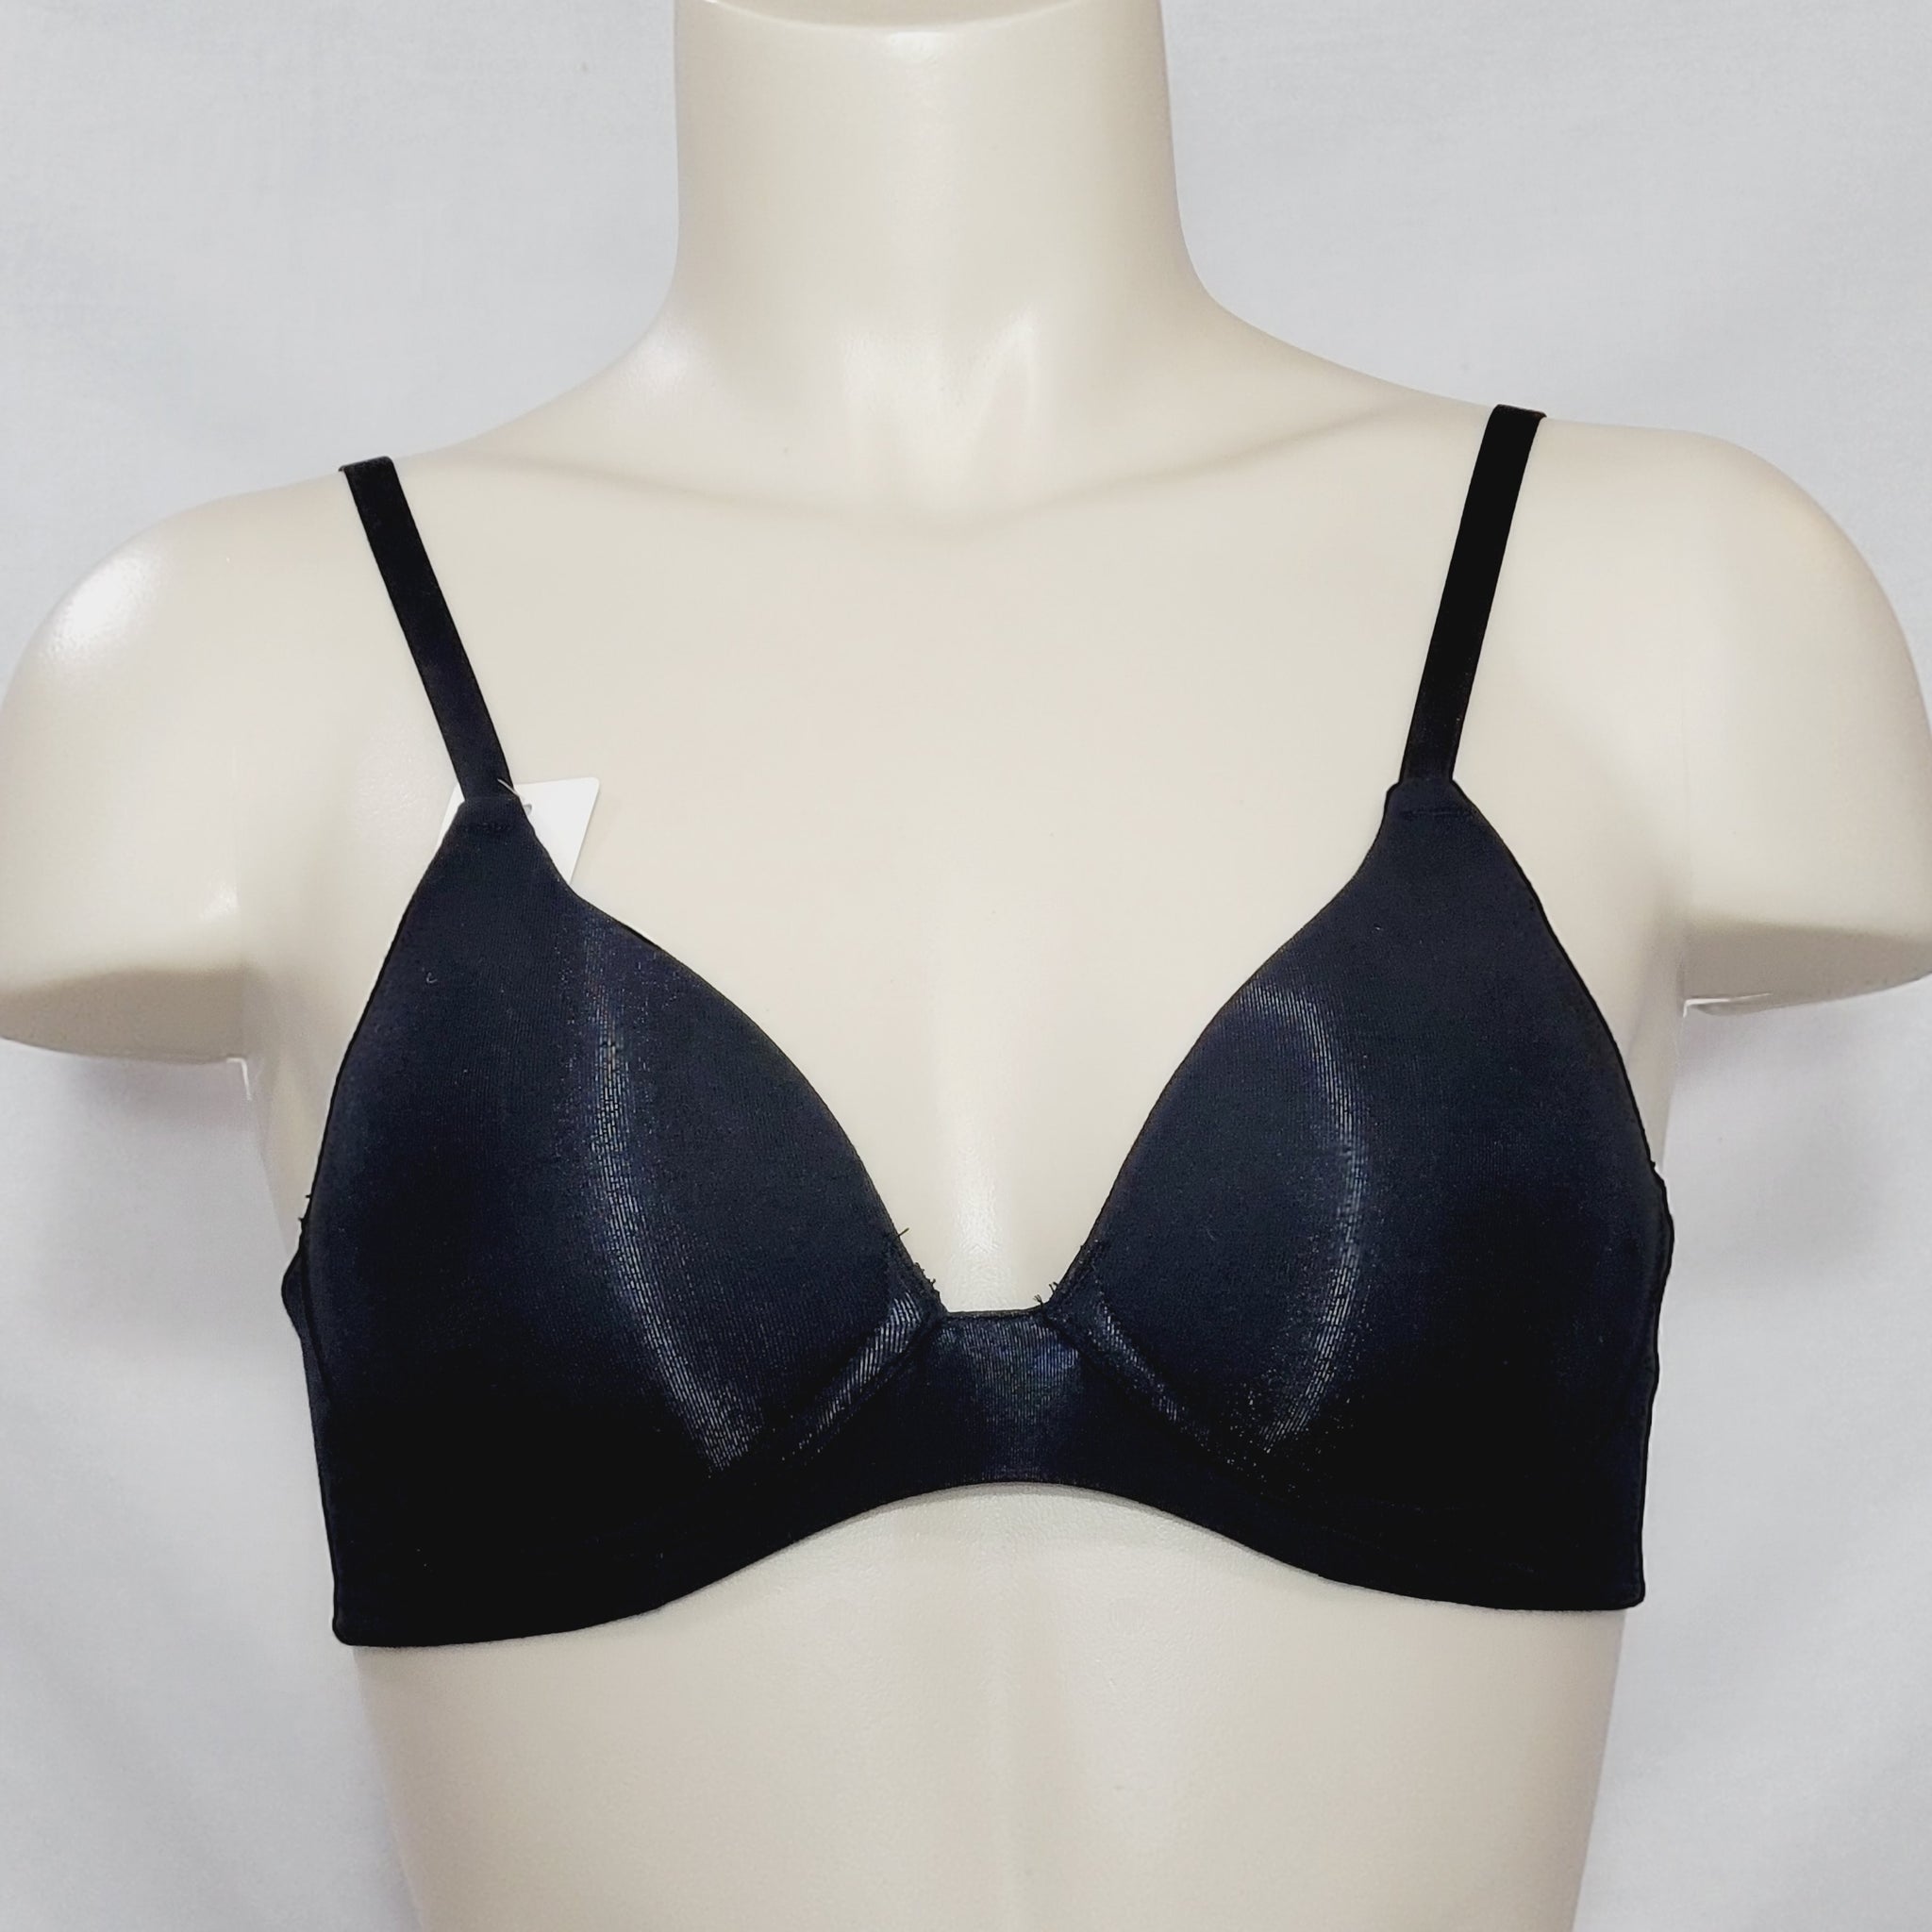 NWT Cacique black lightly lined full coverage bra 46DDD